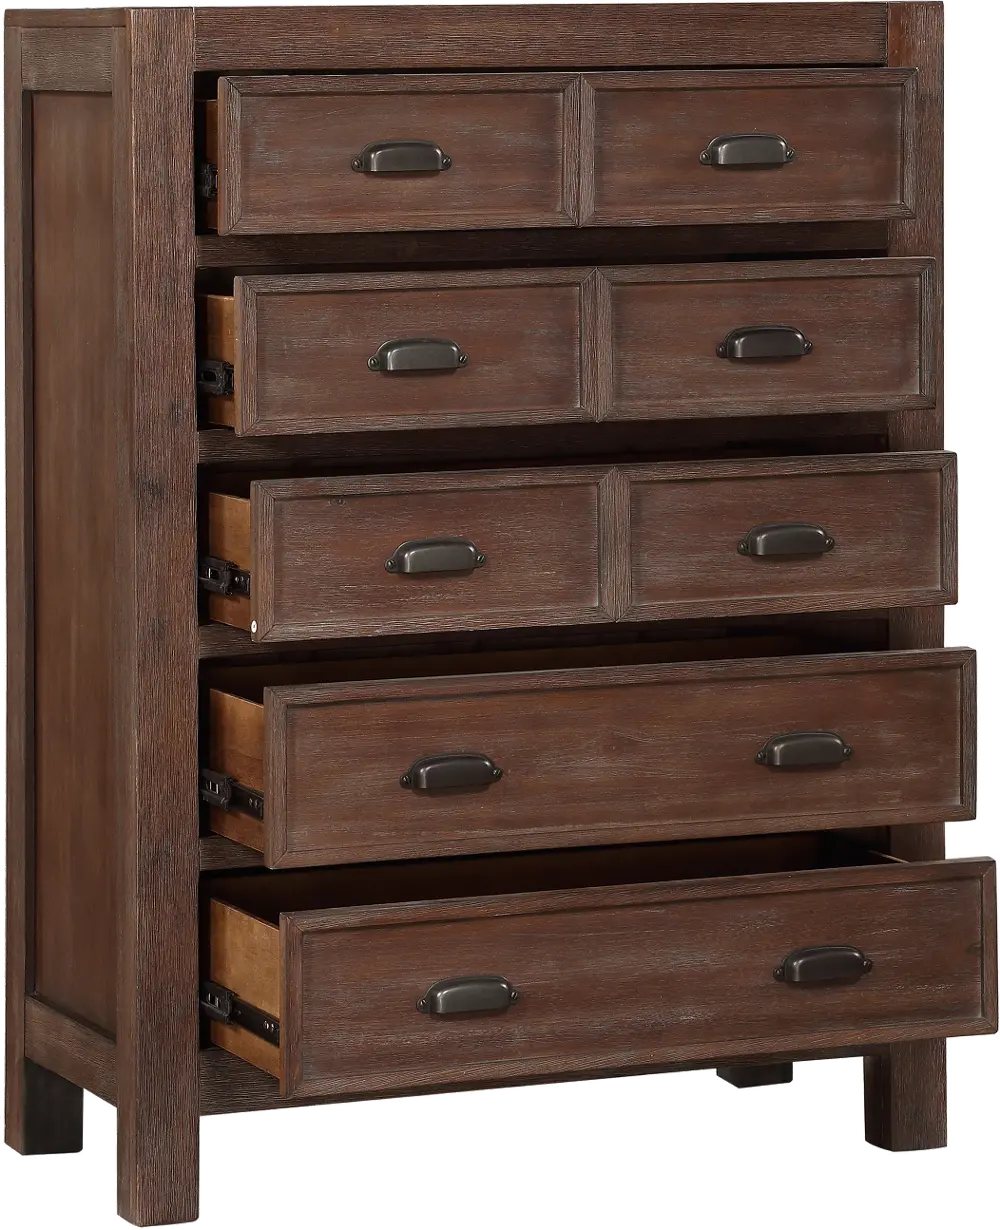 Classic Contemporary Cherry Chest of Drawers - Tremaine-1